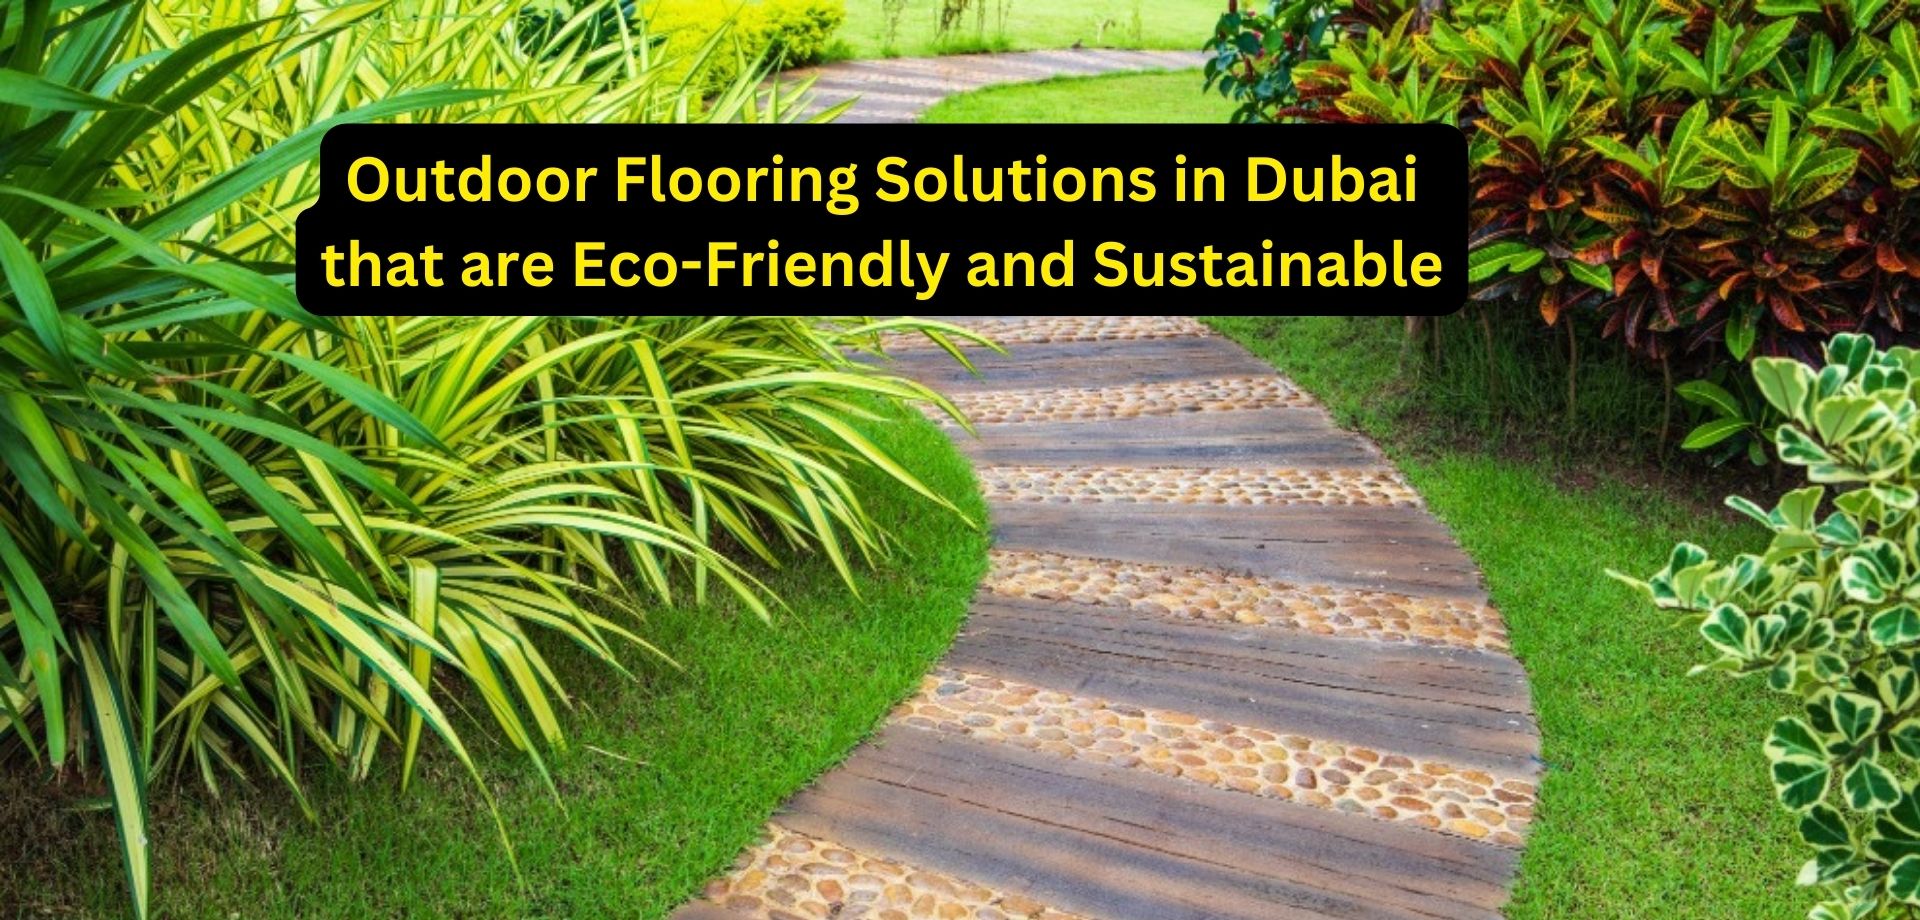 Outdoor Flooring Solutions in Dubai that are Eco-Friendly and Sustainable